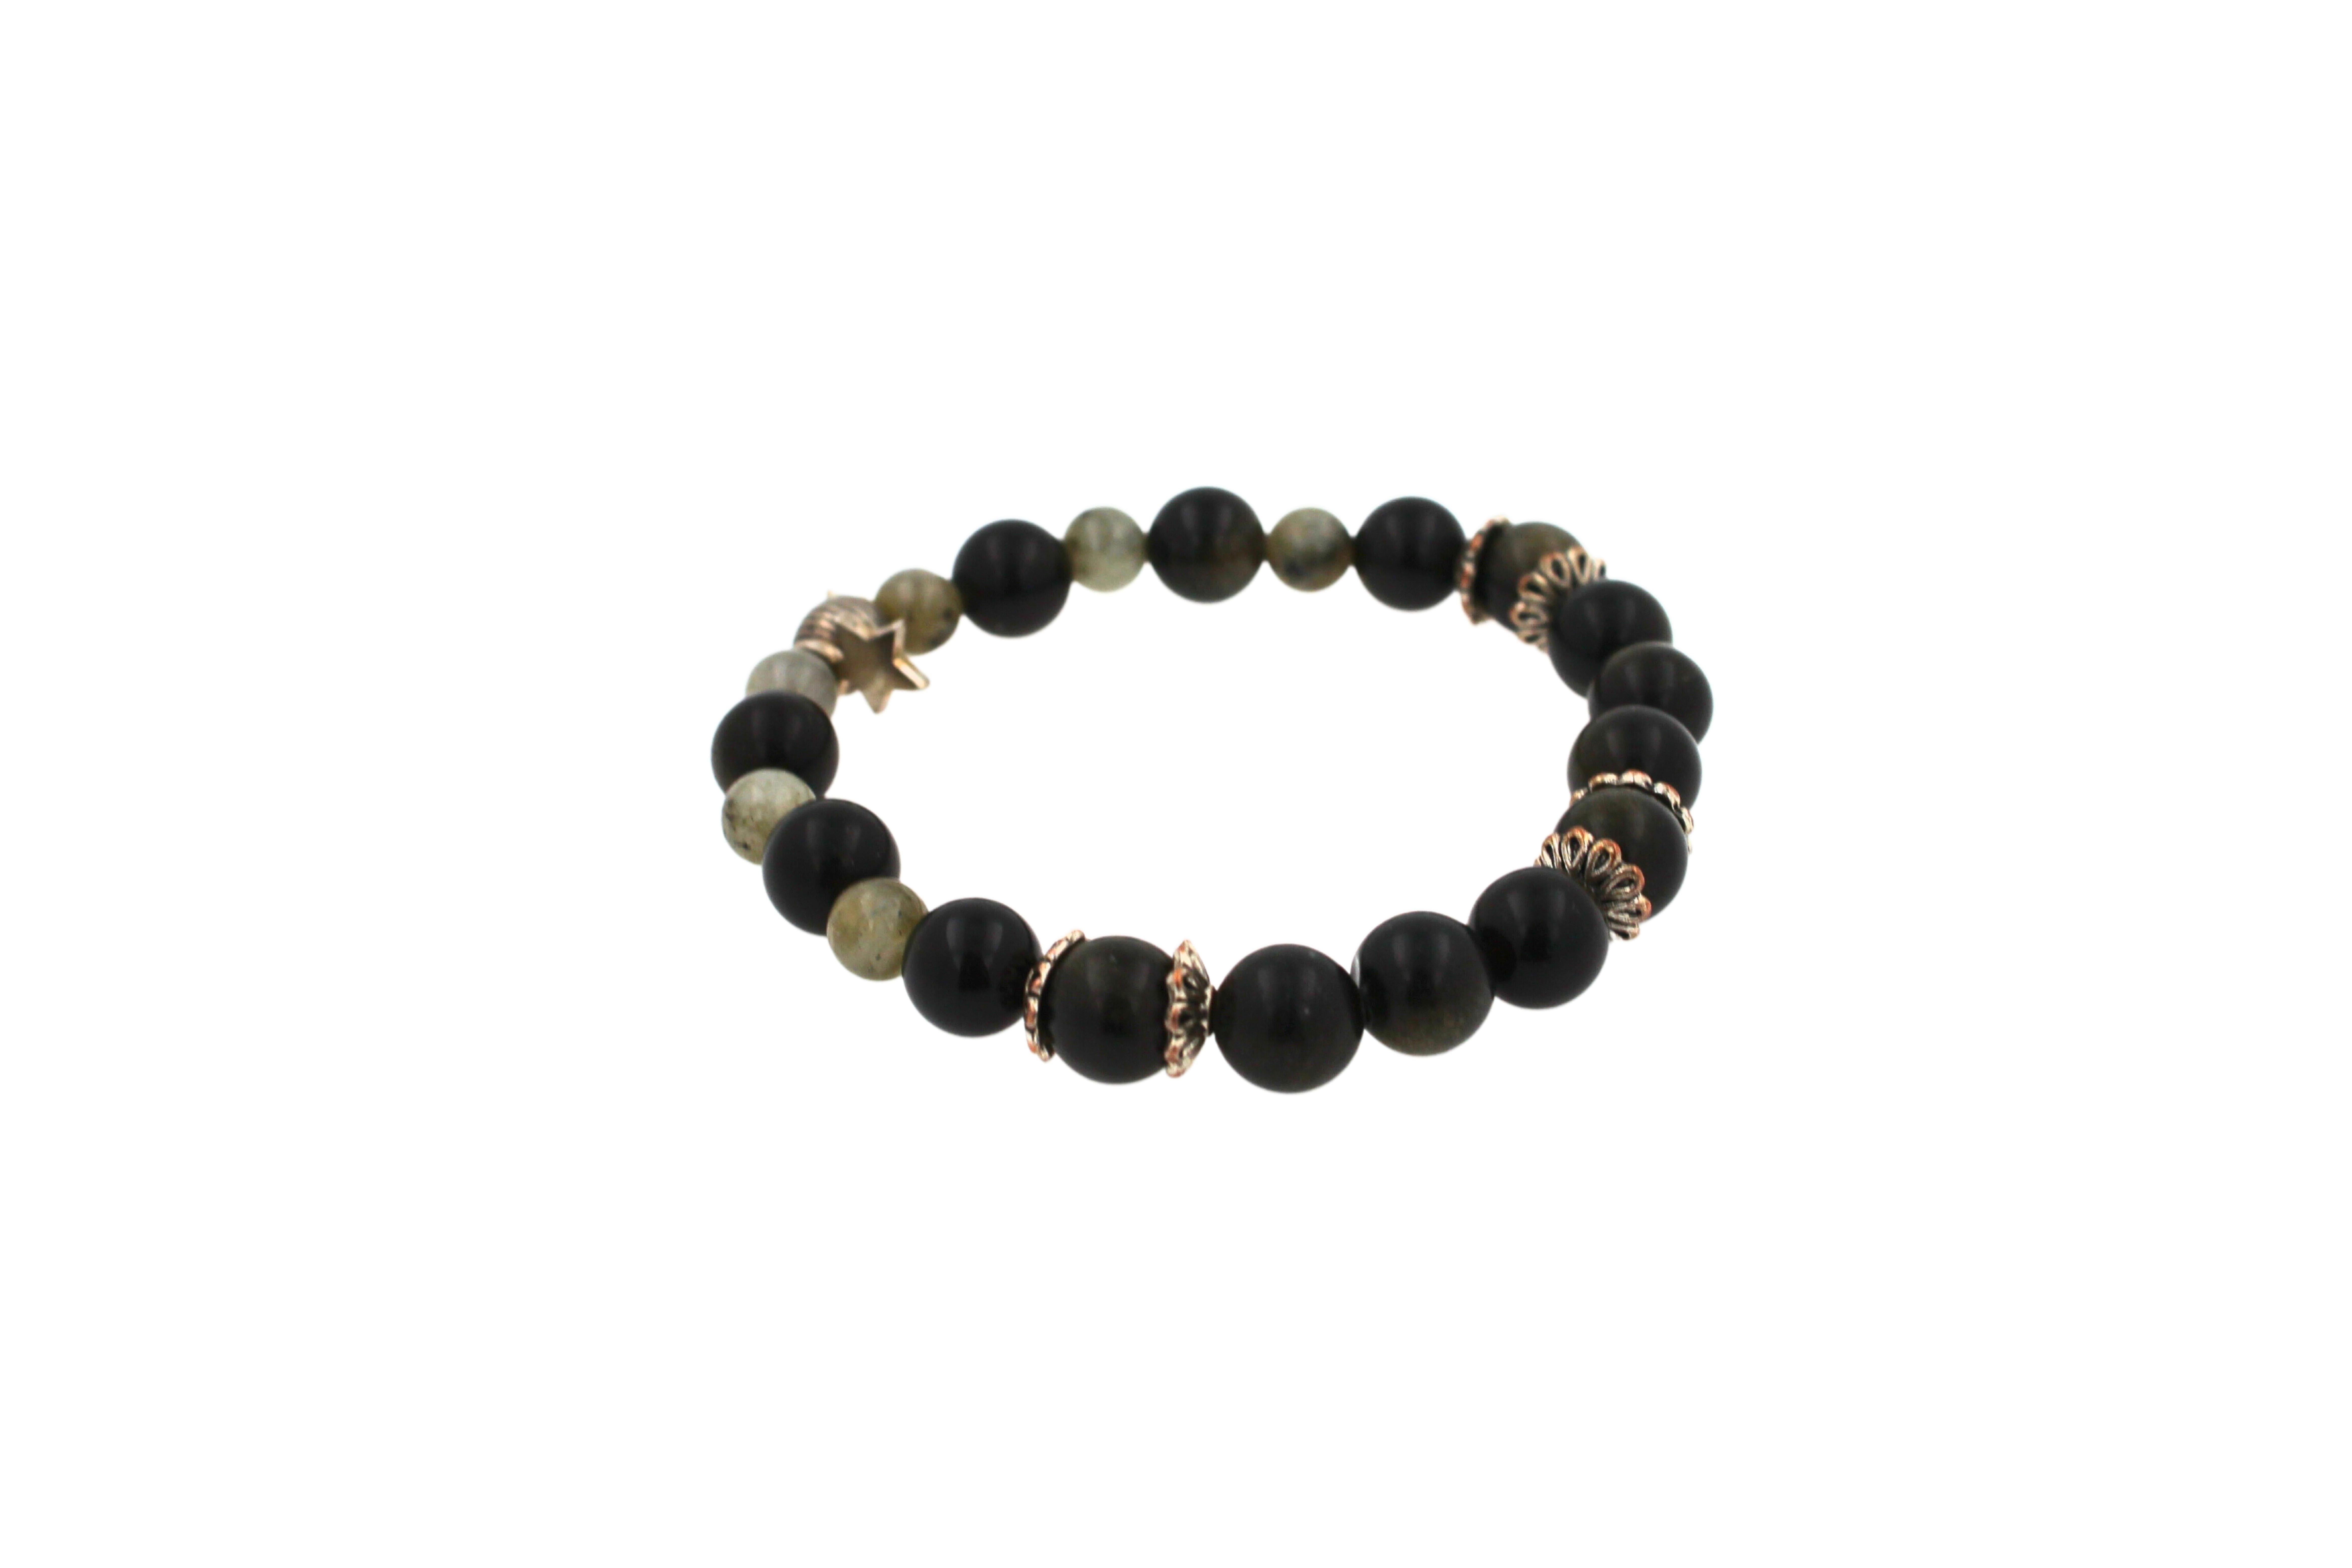 Black Agate Grey Earth Gemstone Round Chakra Beads Stretchy Unique Statement Bracelet
Size of Bracelet - Fits Wrist Sizes of 6-9 Inches (Flexible Stretching Wire)
Natural, Genuine Gemstones